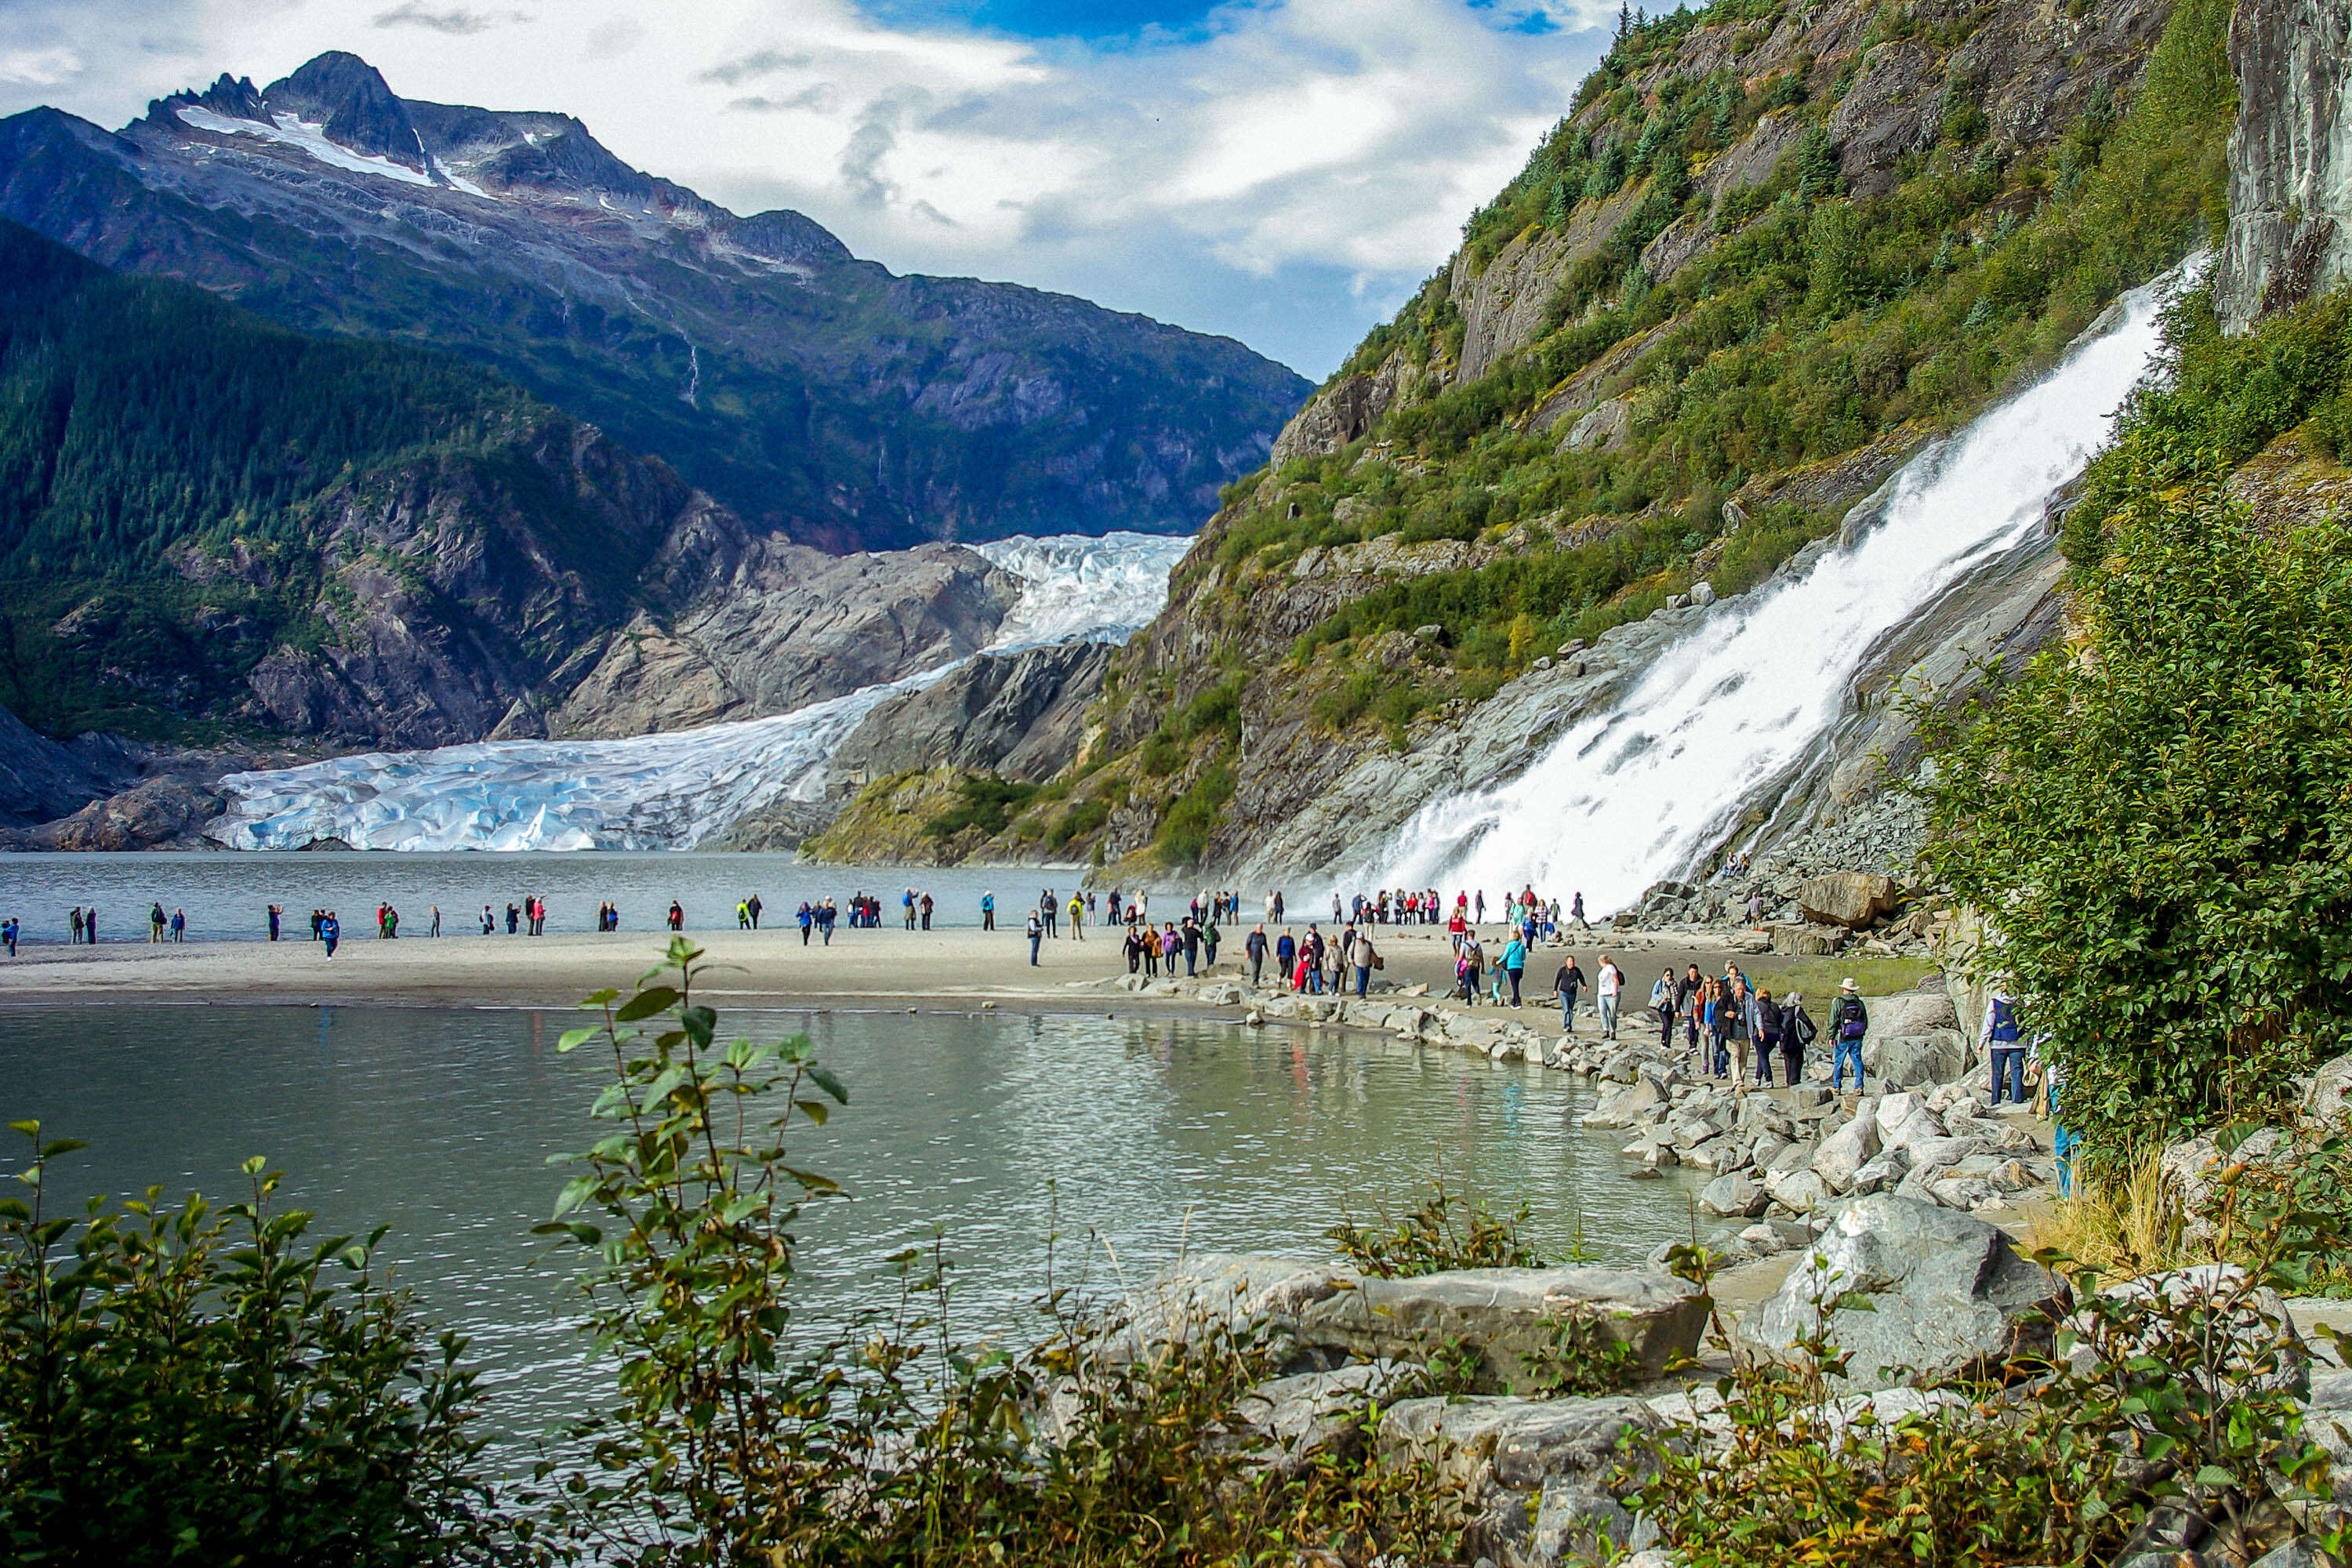 People gathered around Nugget Falls in Mendenhall Glacier